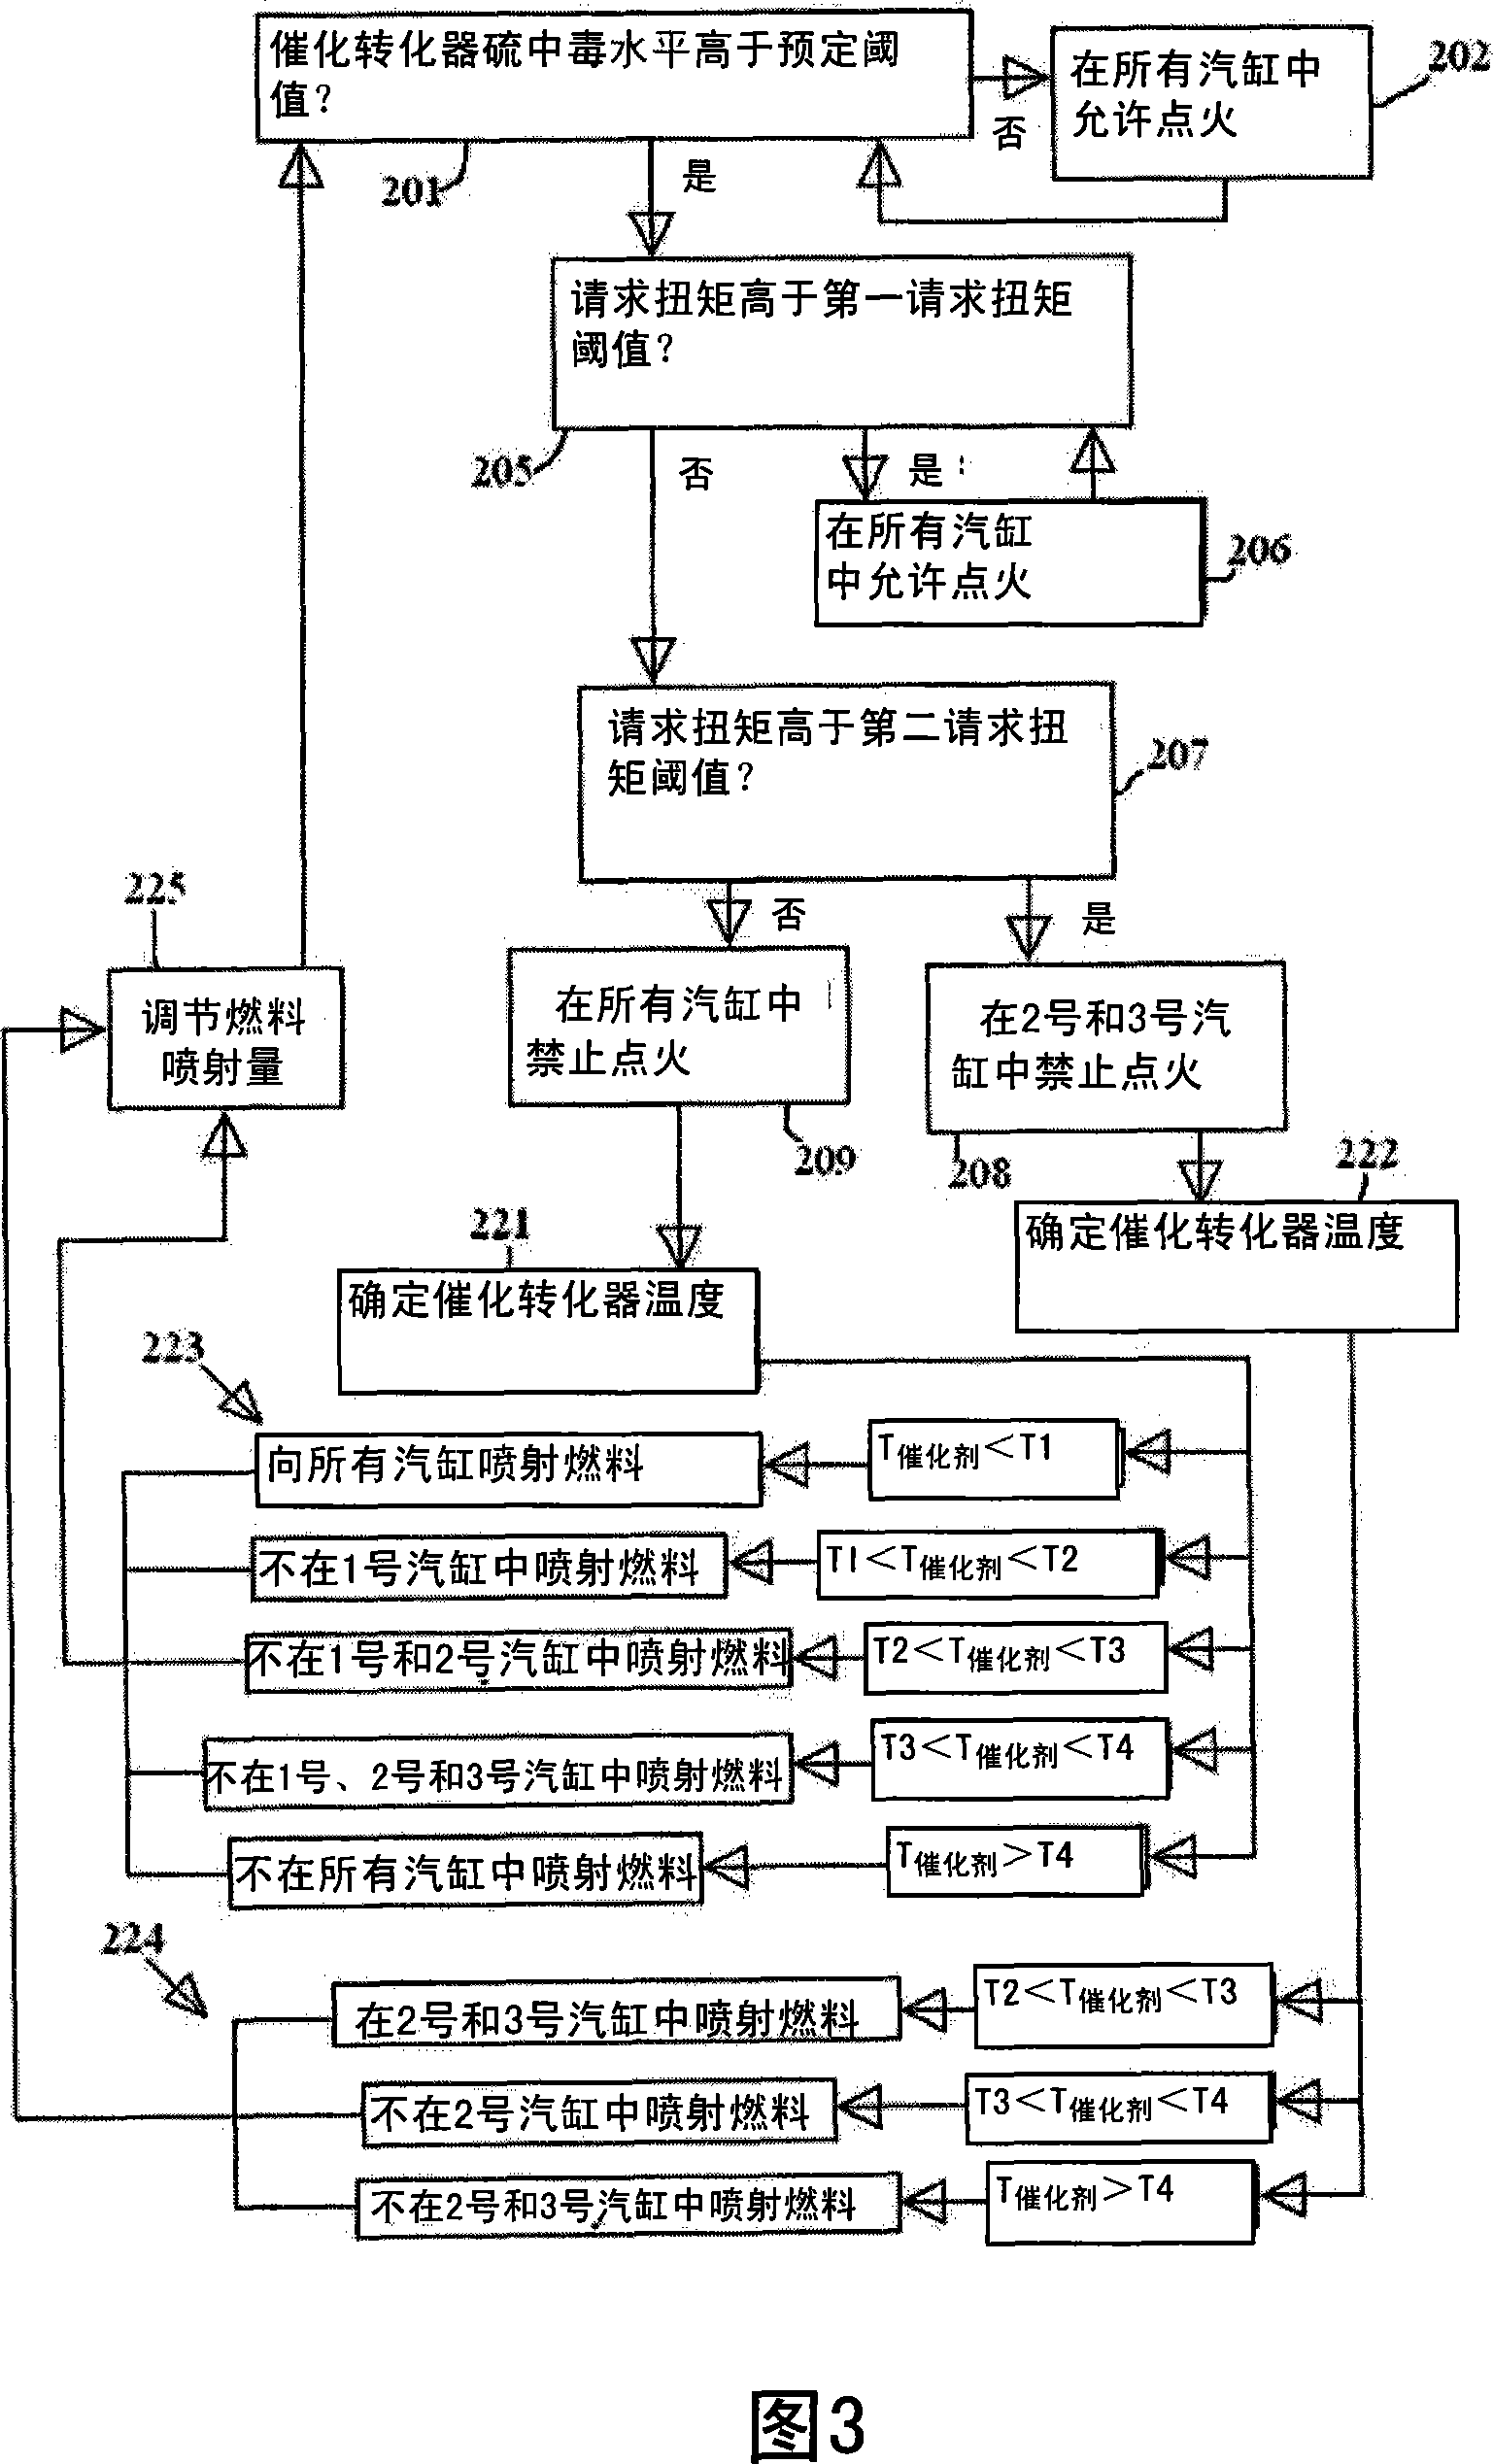 Exhaust gas treatment device regeneration inhibiting fuel combustion in engine cylinder